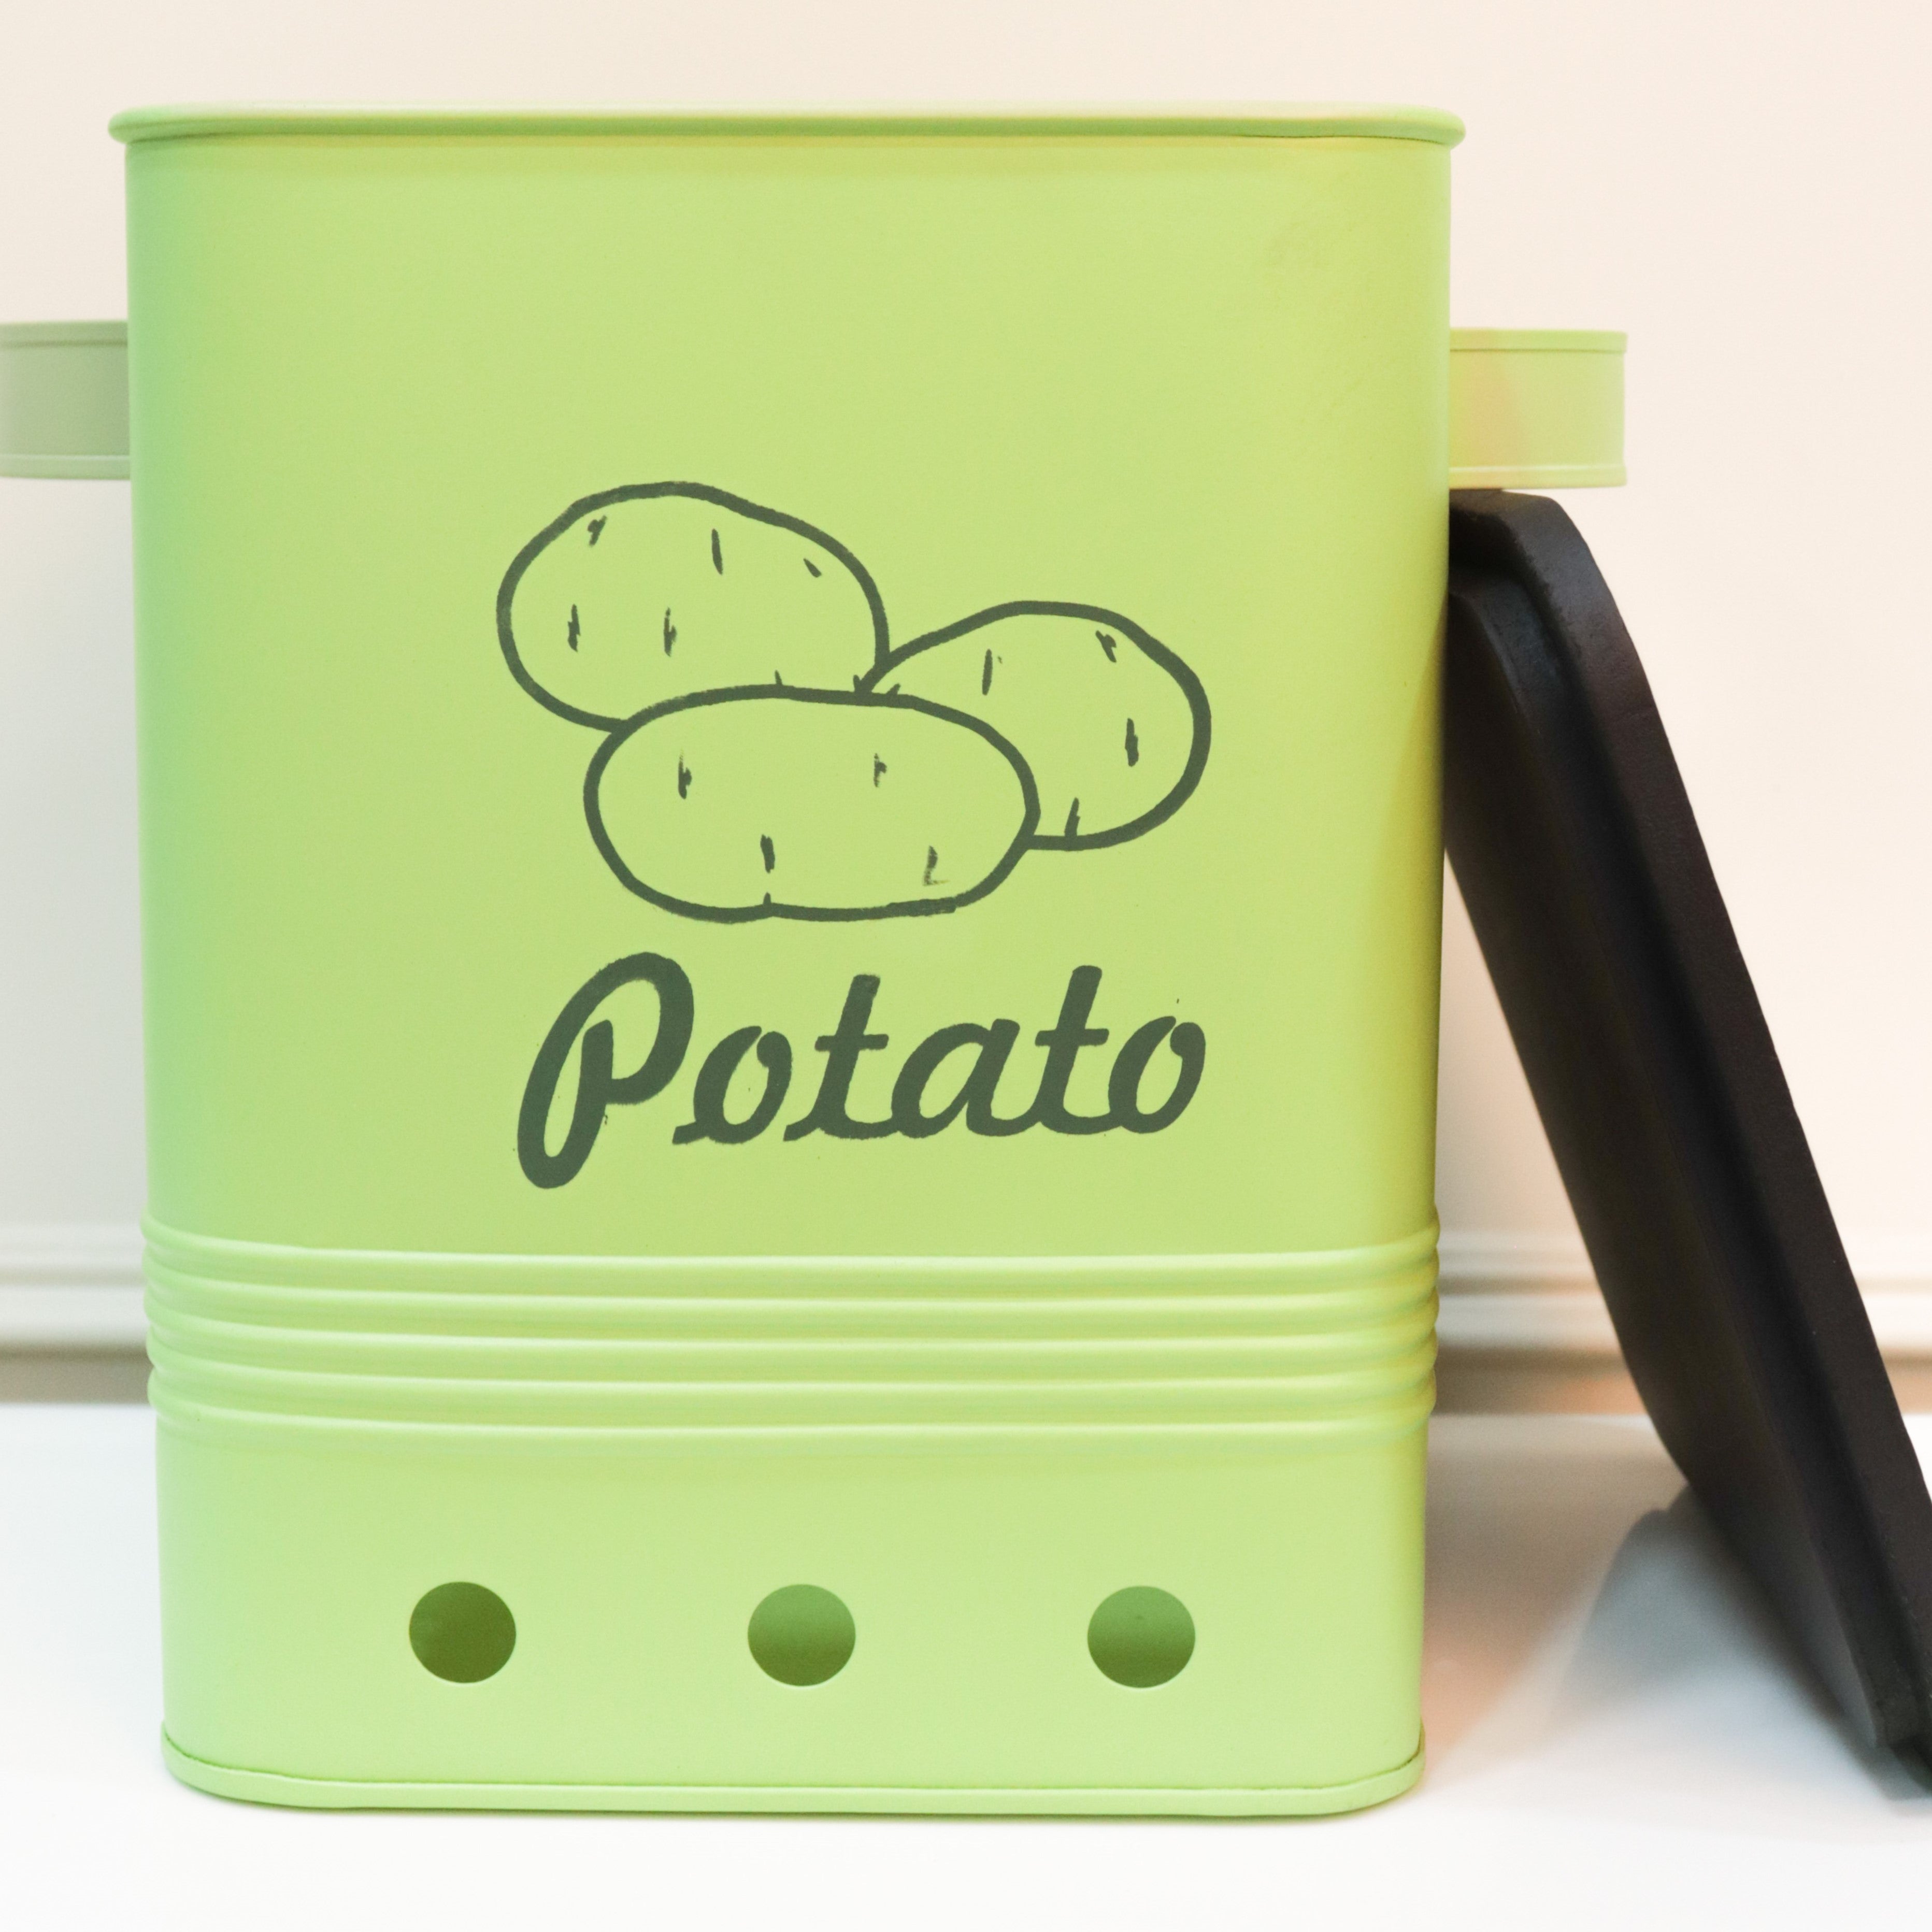 Square potato box with wooden Lid